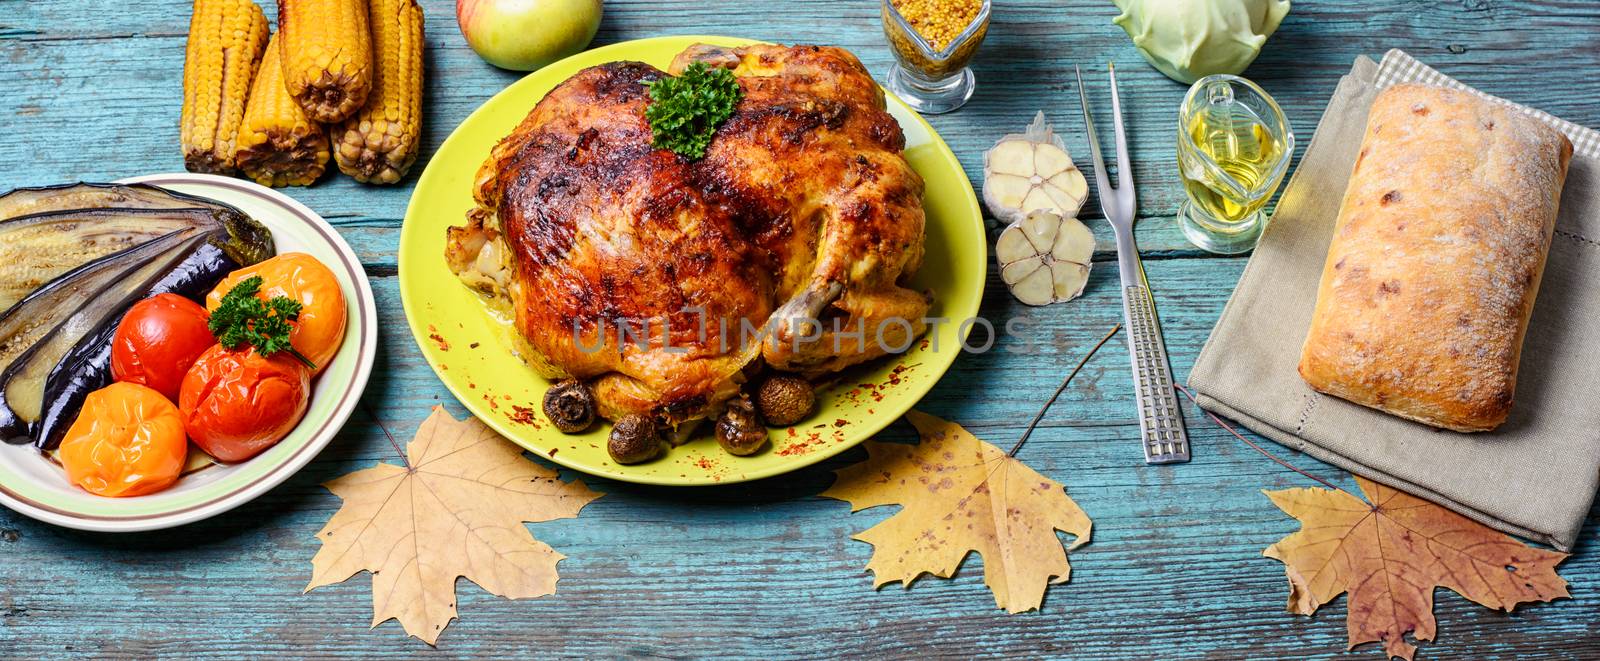 Roasted chicken on wooden plate by LMykola